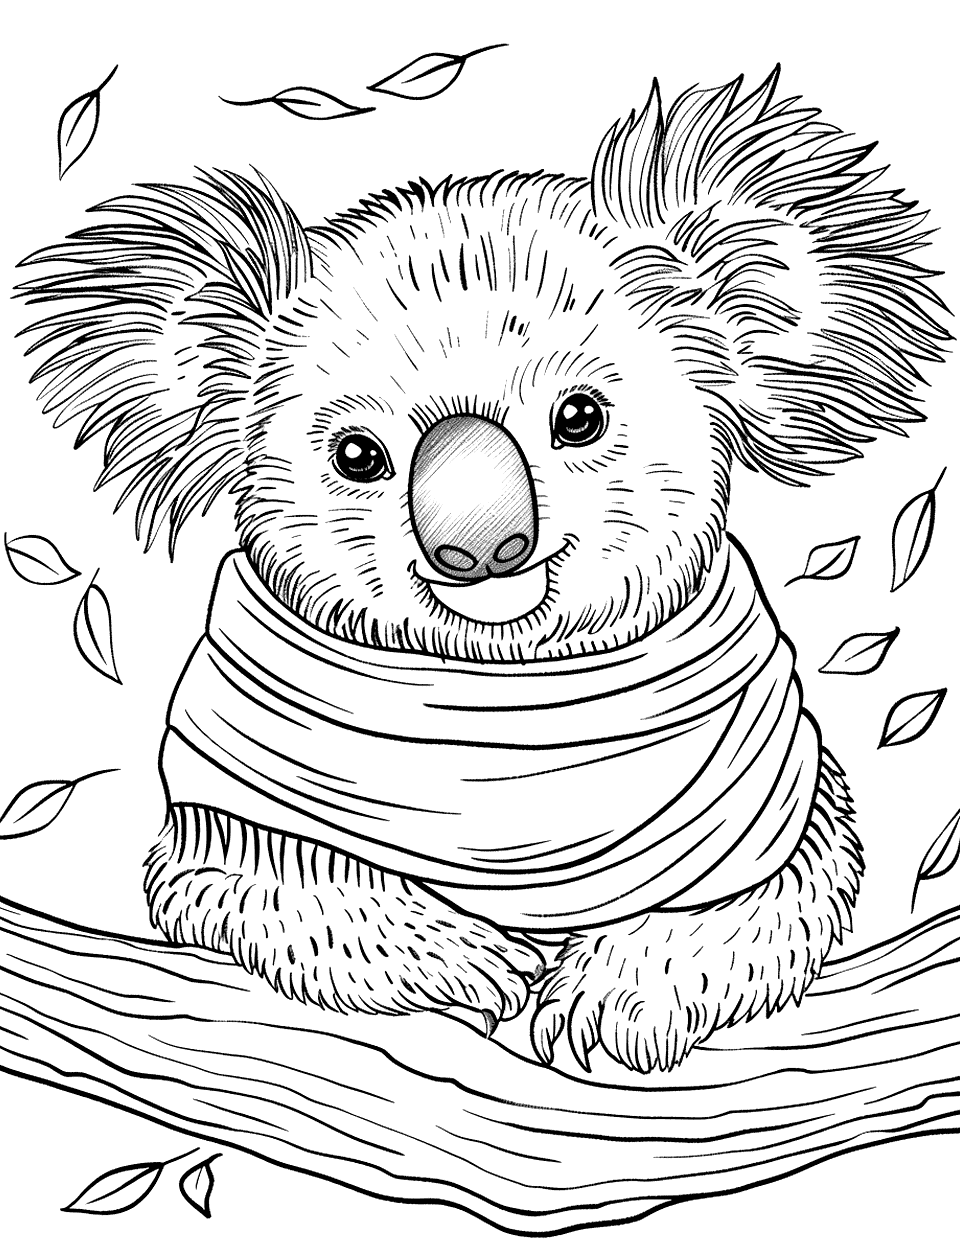 Koala on a Cool Day Coloring Page - A koala wrapped in a scarf, with leaves swirling in the windy background.